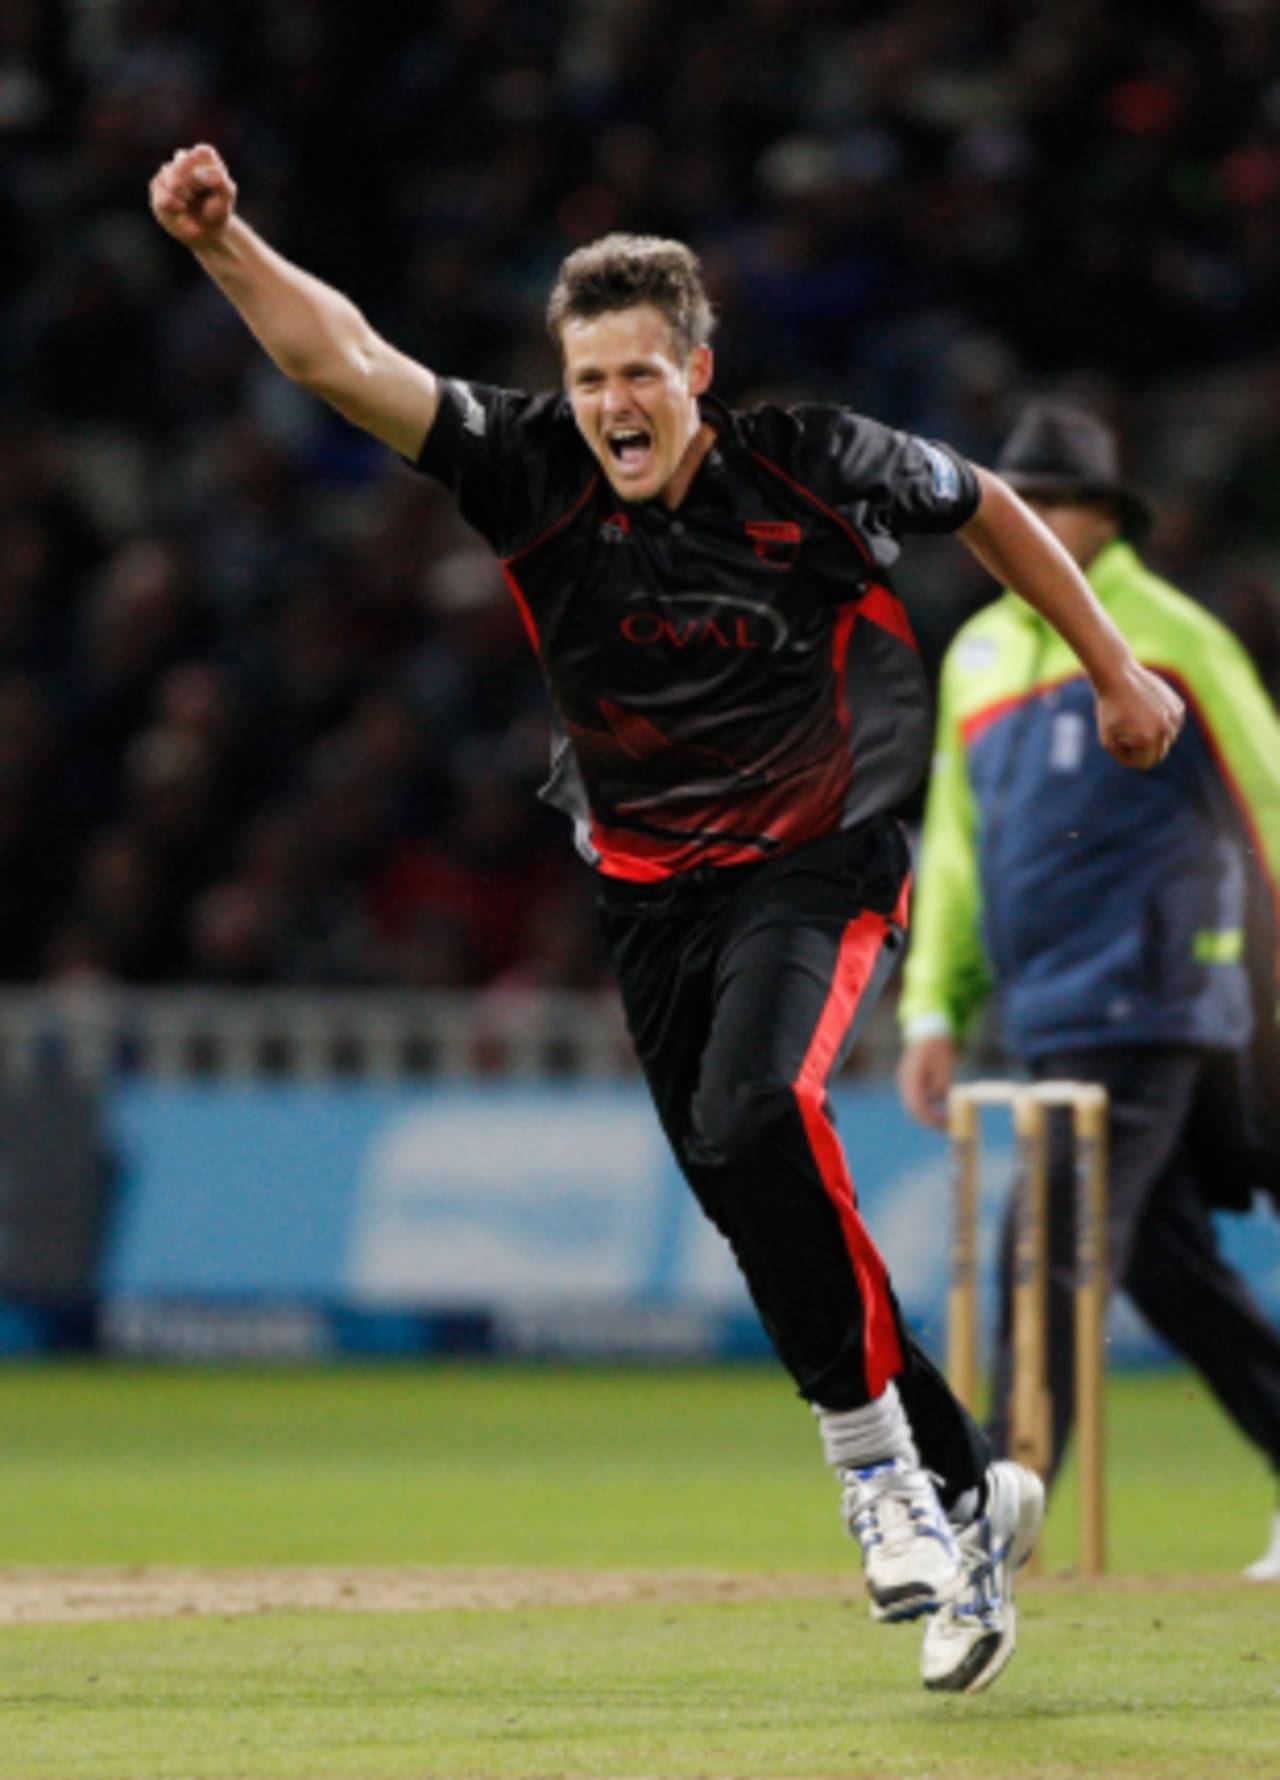 Wayne White was part of the Leicestershire team that won the FLt20 in 2011&nbsp;&nbsp;&bull;&nbsp;&nbsp;Getty Images